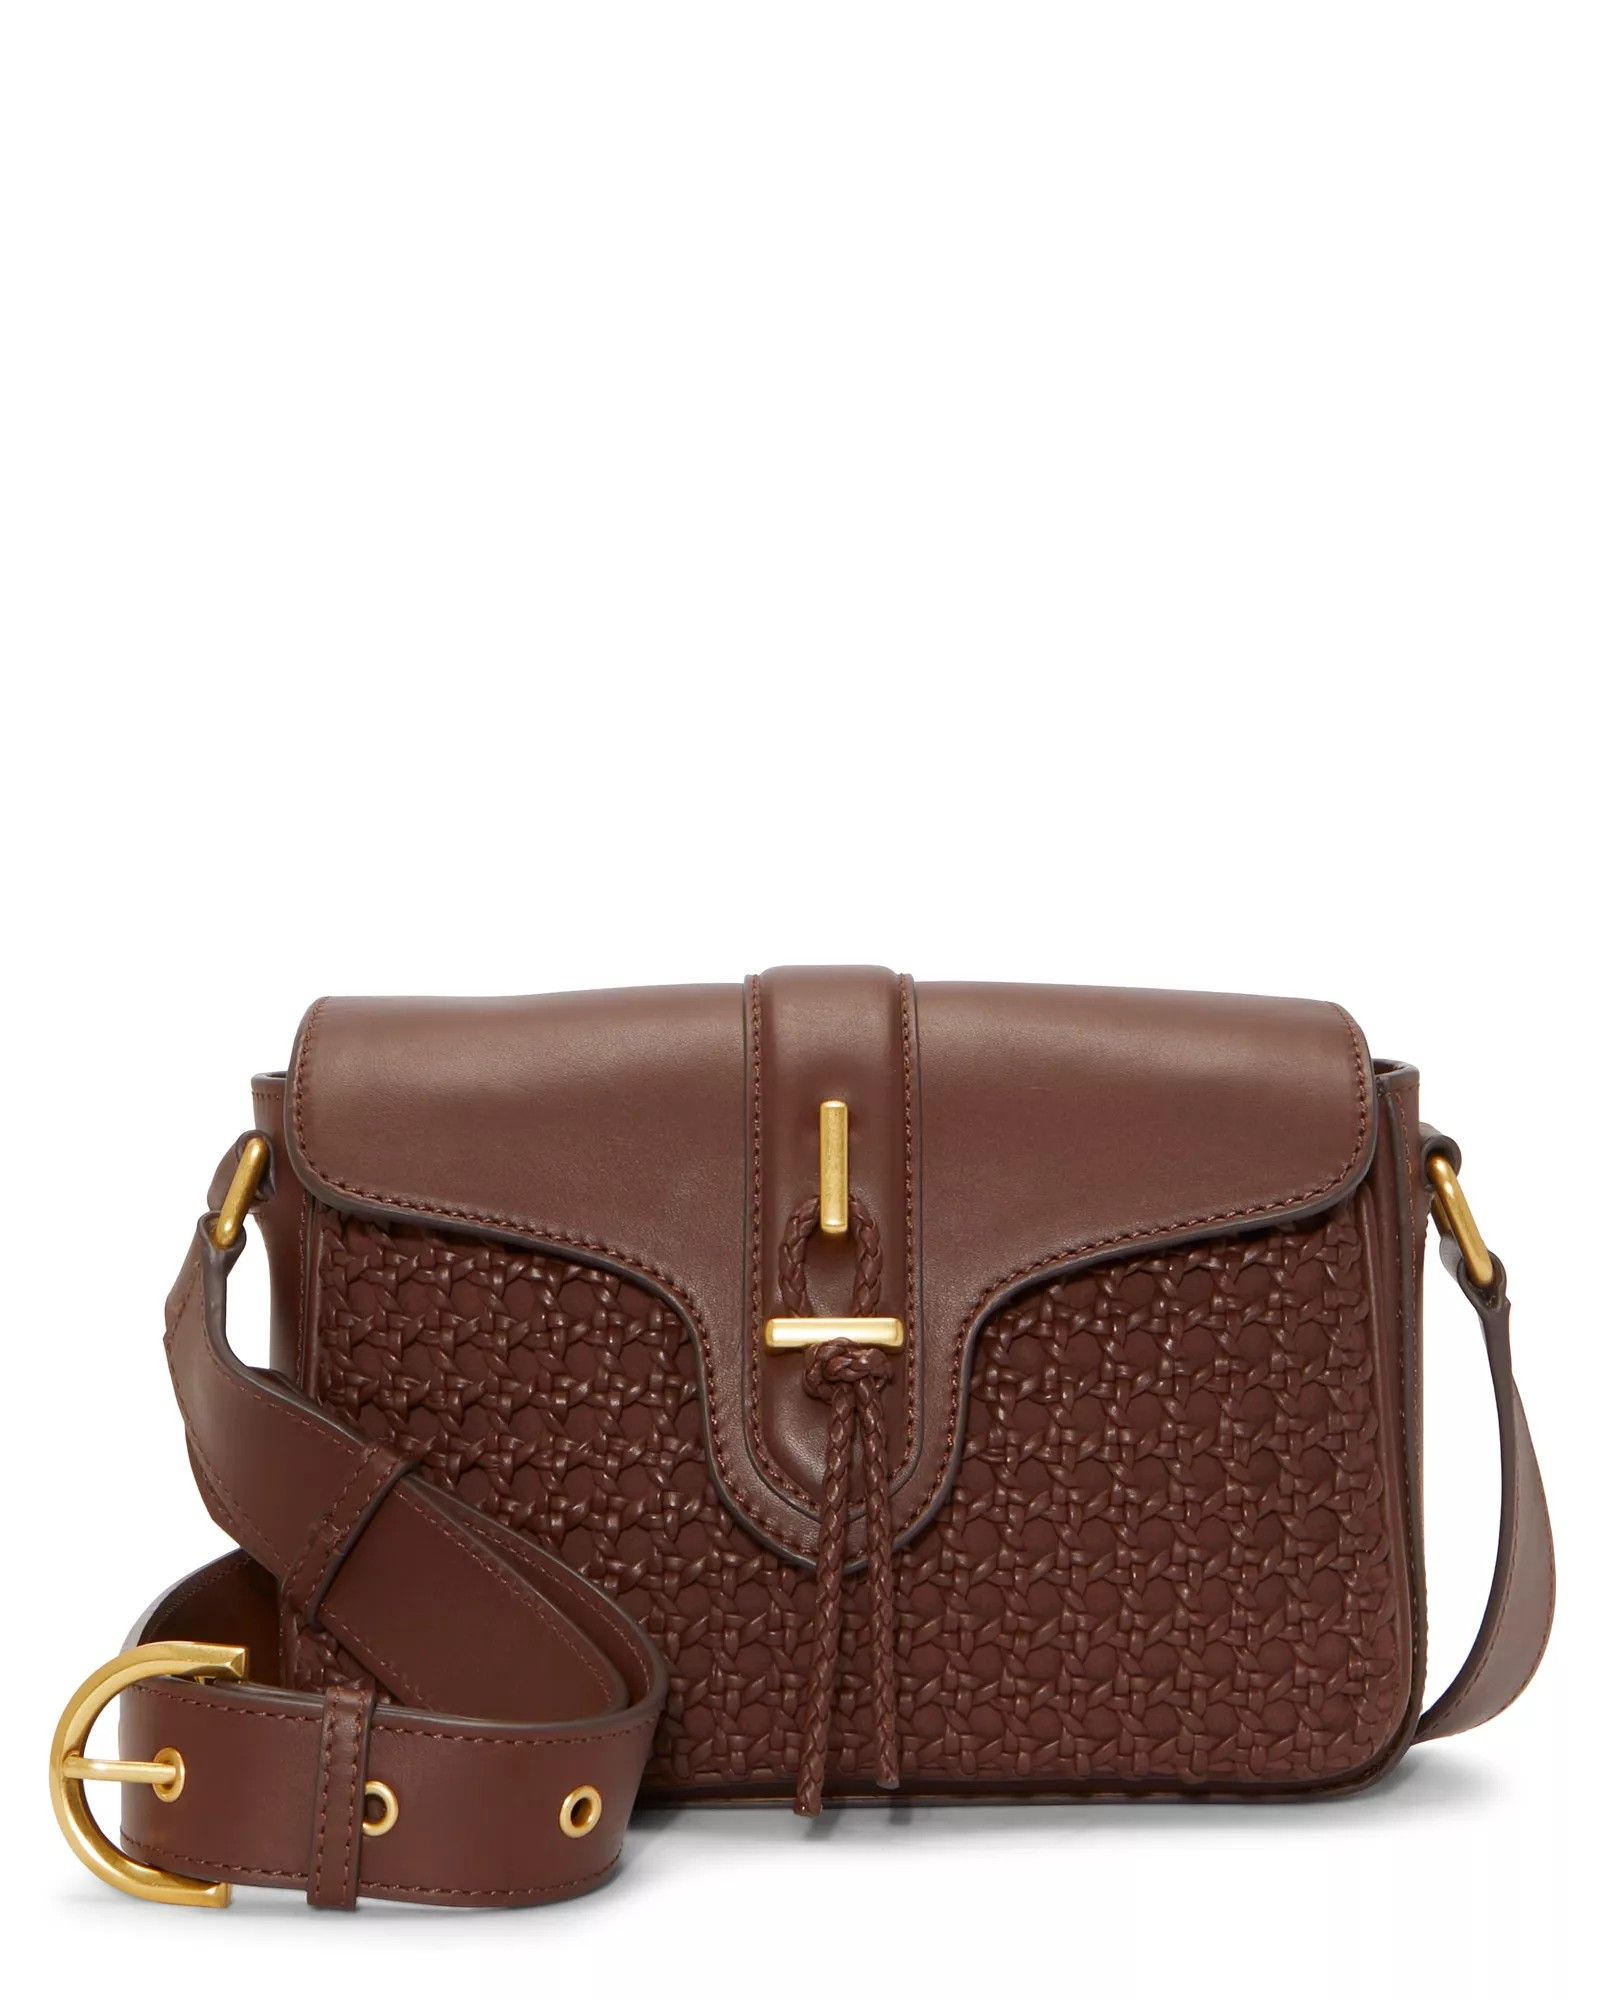 Vince Camuto Maecy Crossbody Bag | Vince Camuto